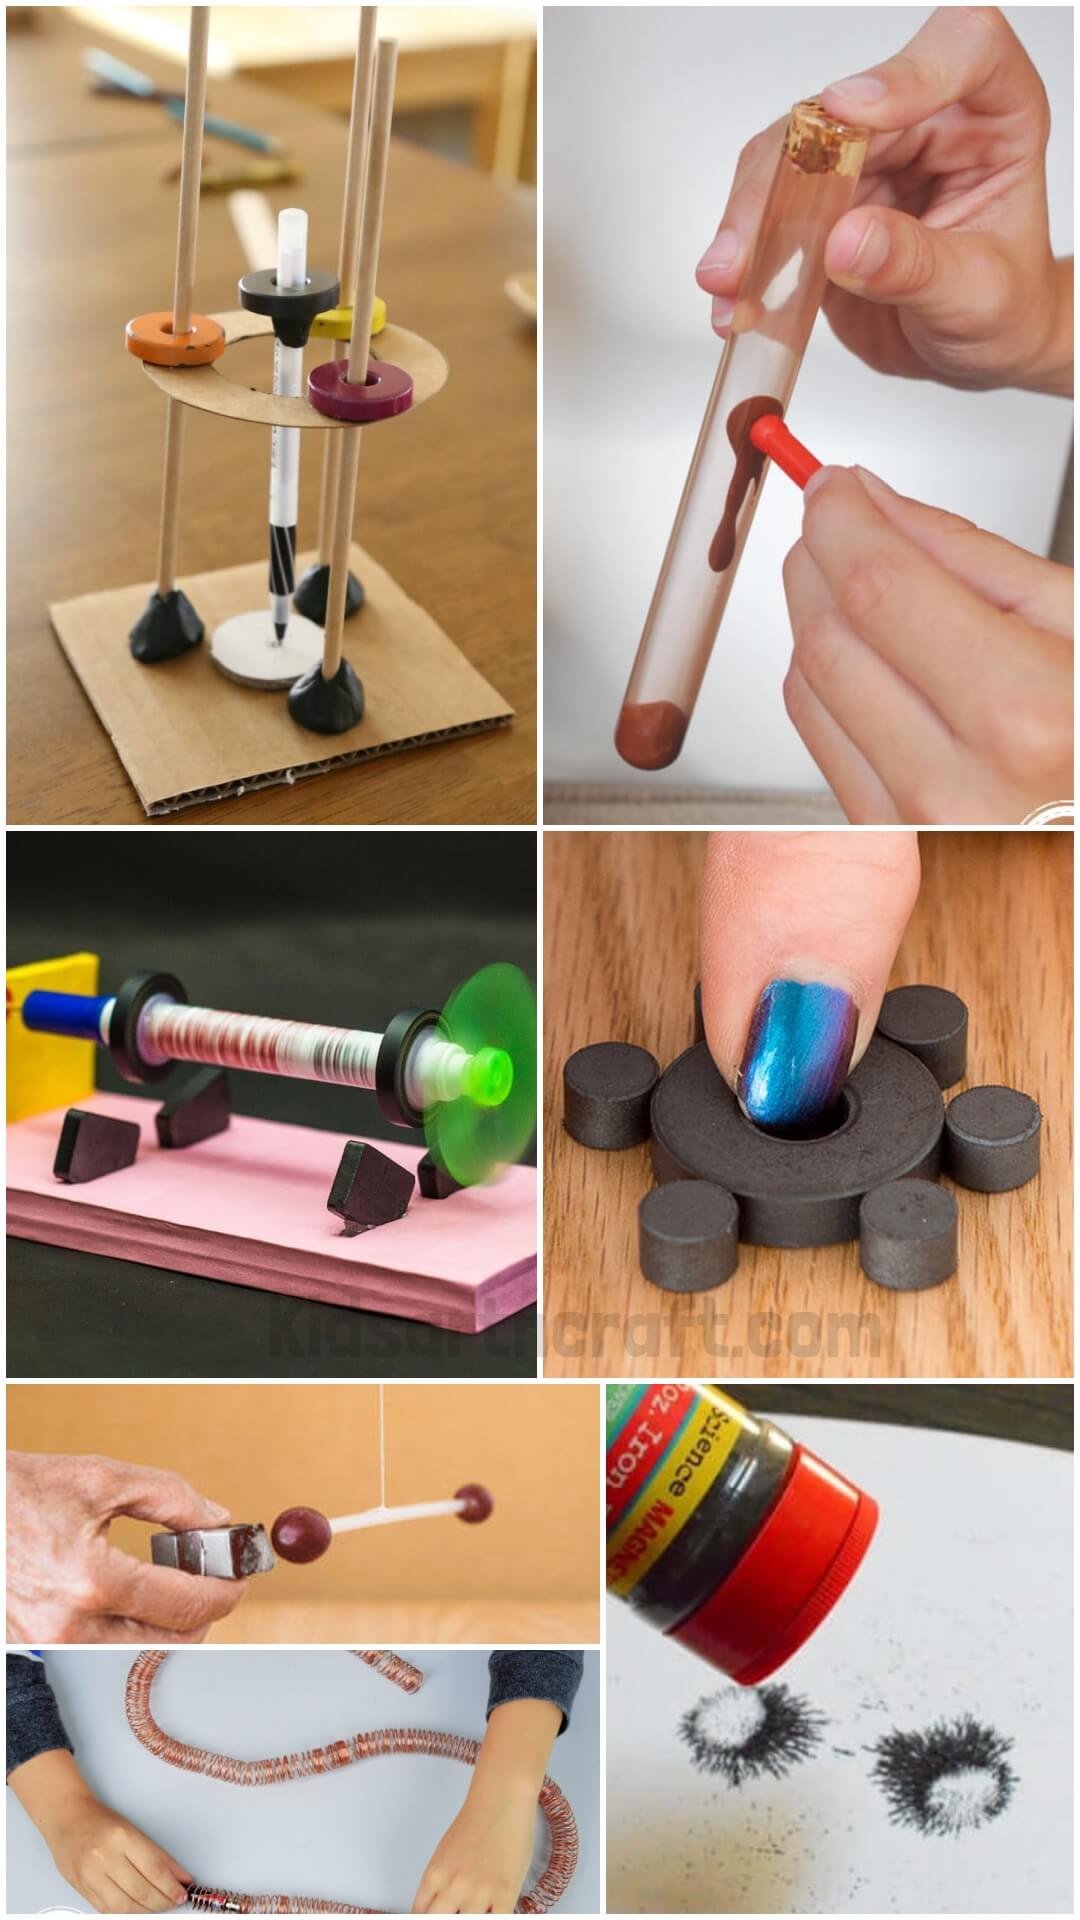 Magnet experiments for 3rd grade